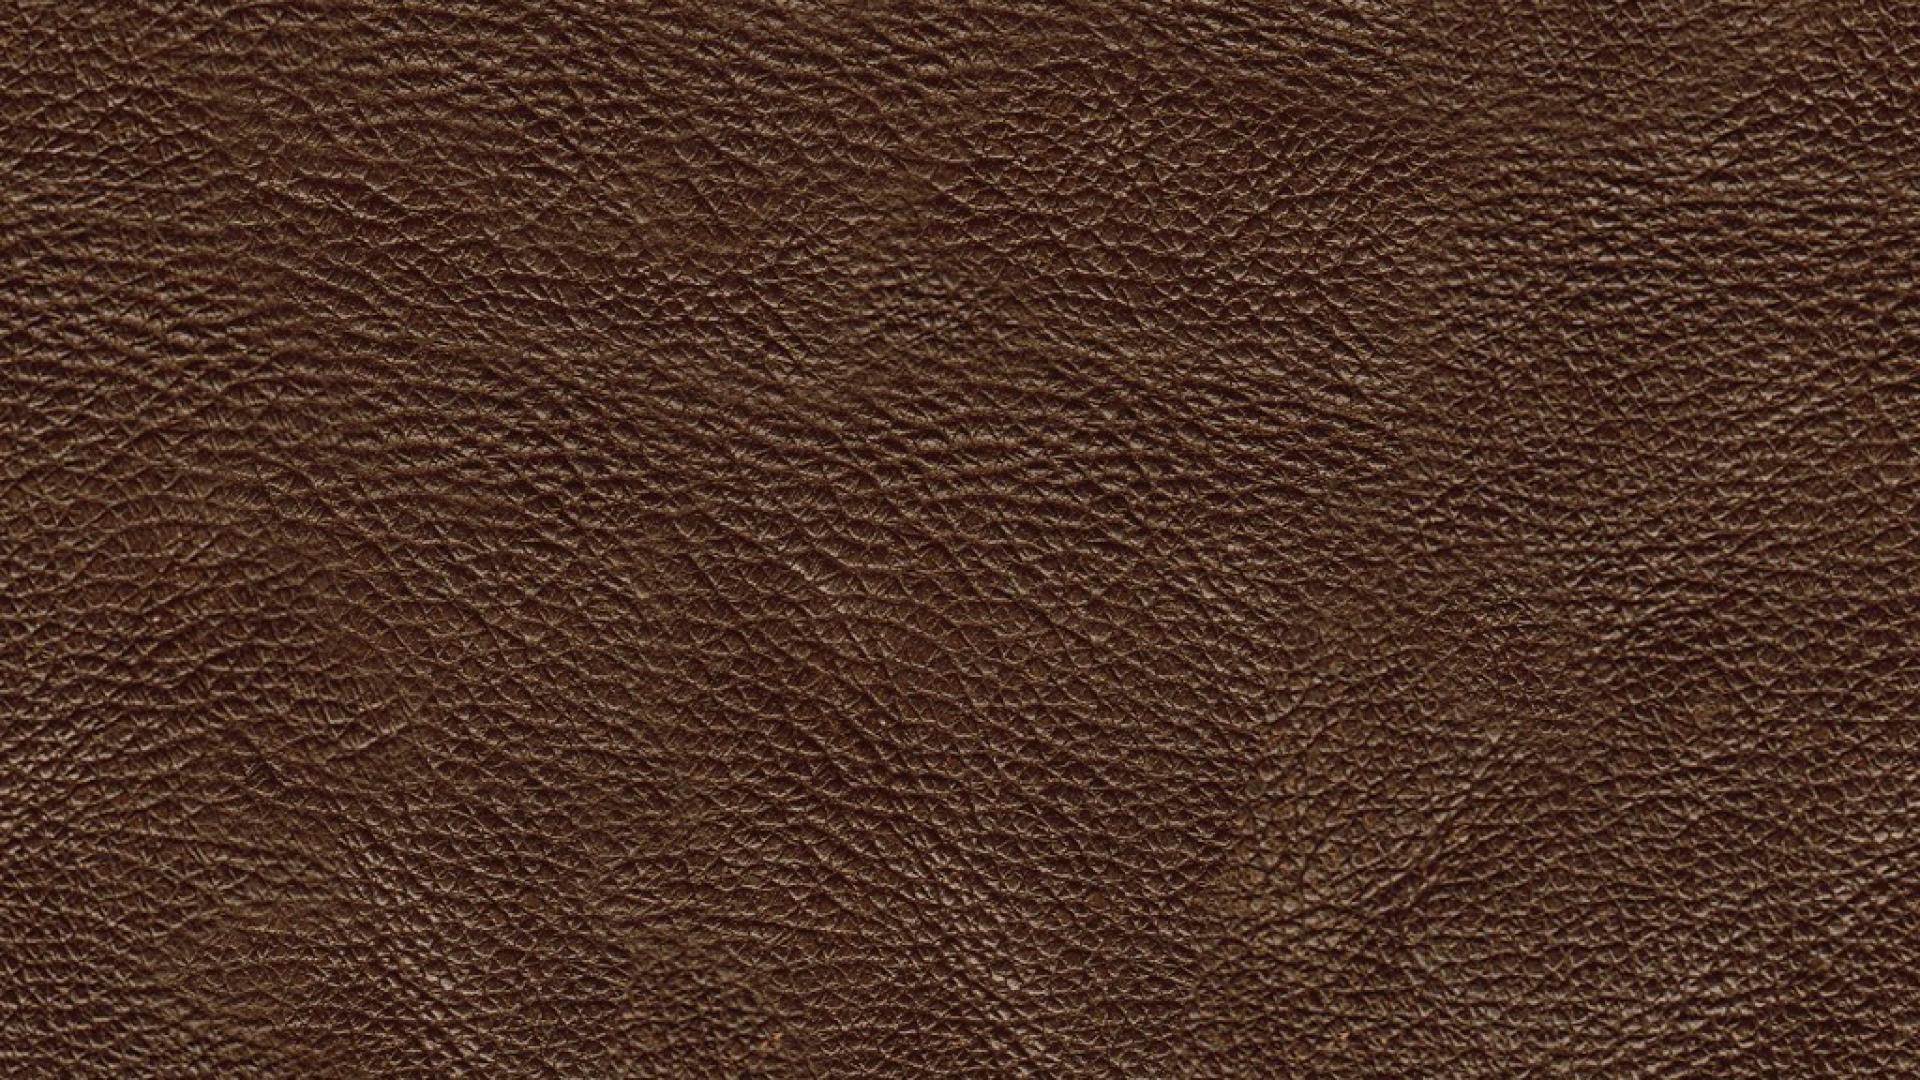 Leather Brown Textures Wallpaper, Leather Wall Paper